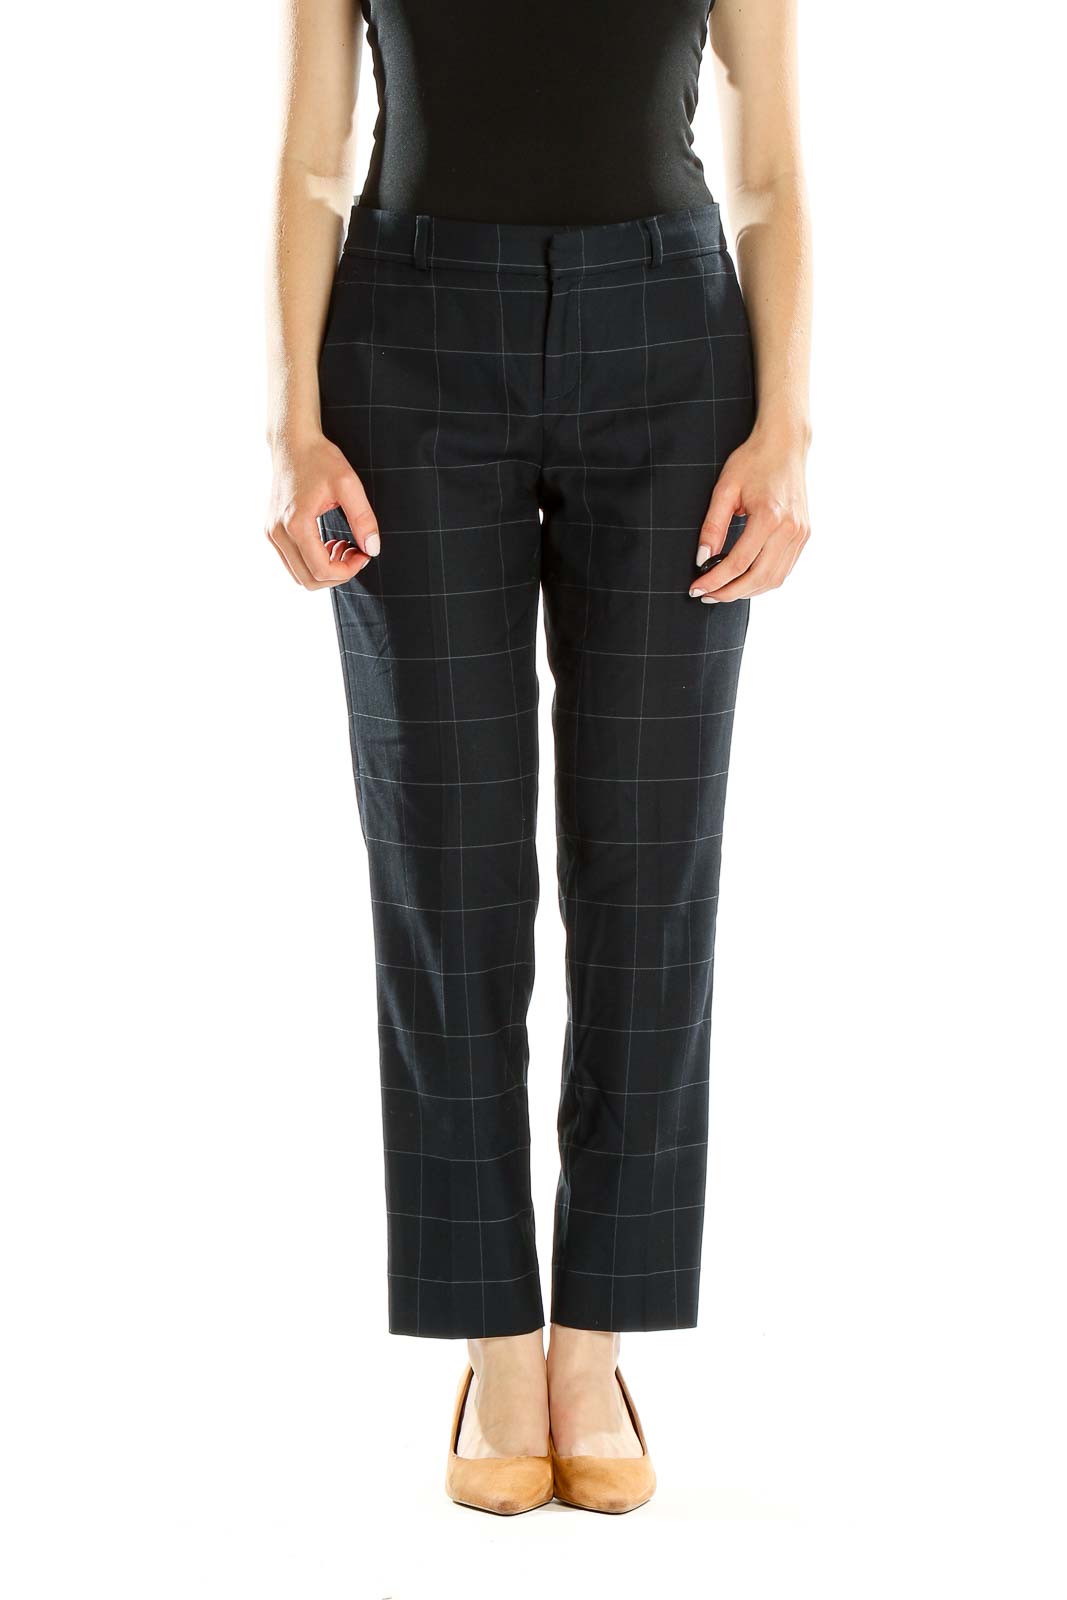 Banana Republic - Blue Checkered All Day Wear Trousers Polyester